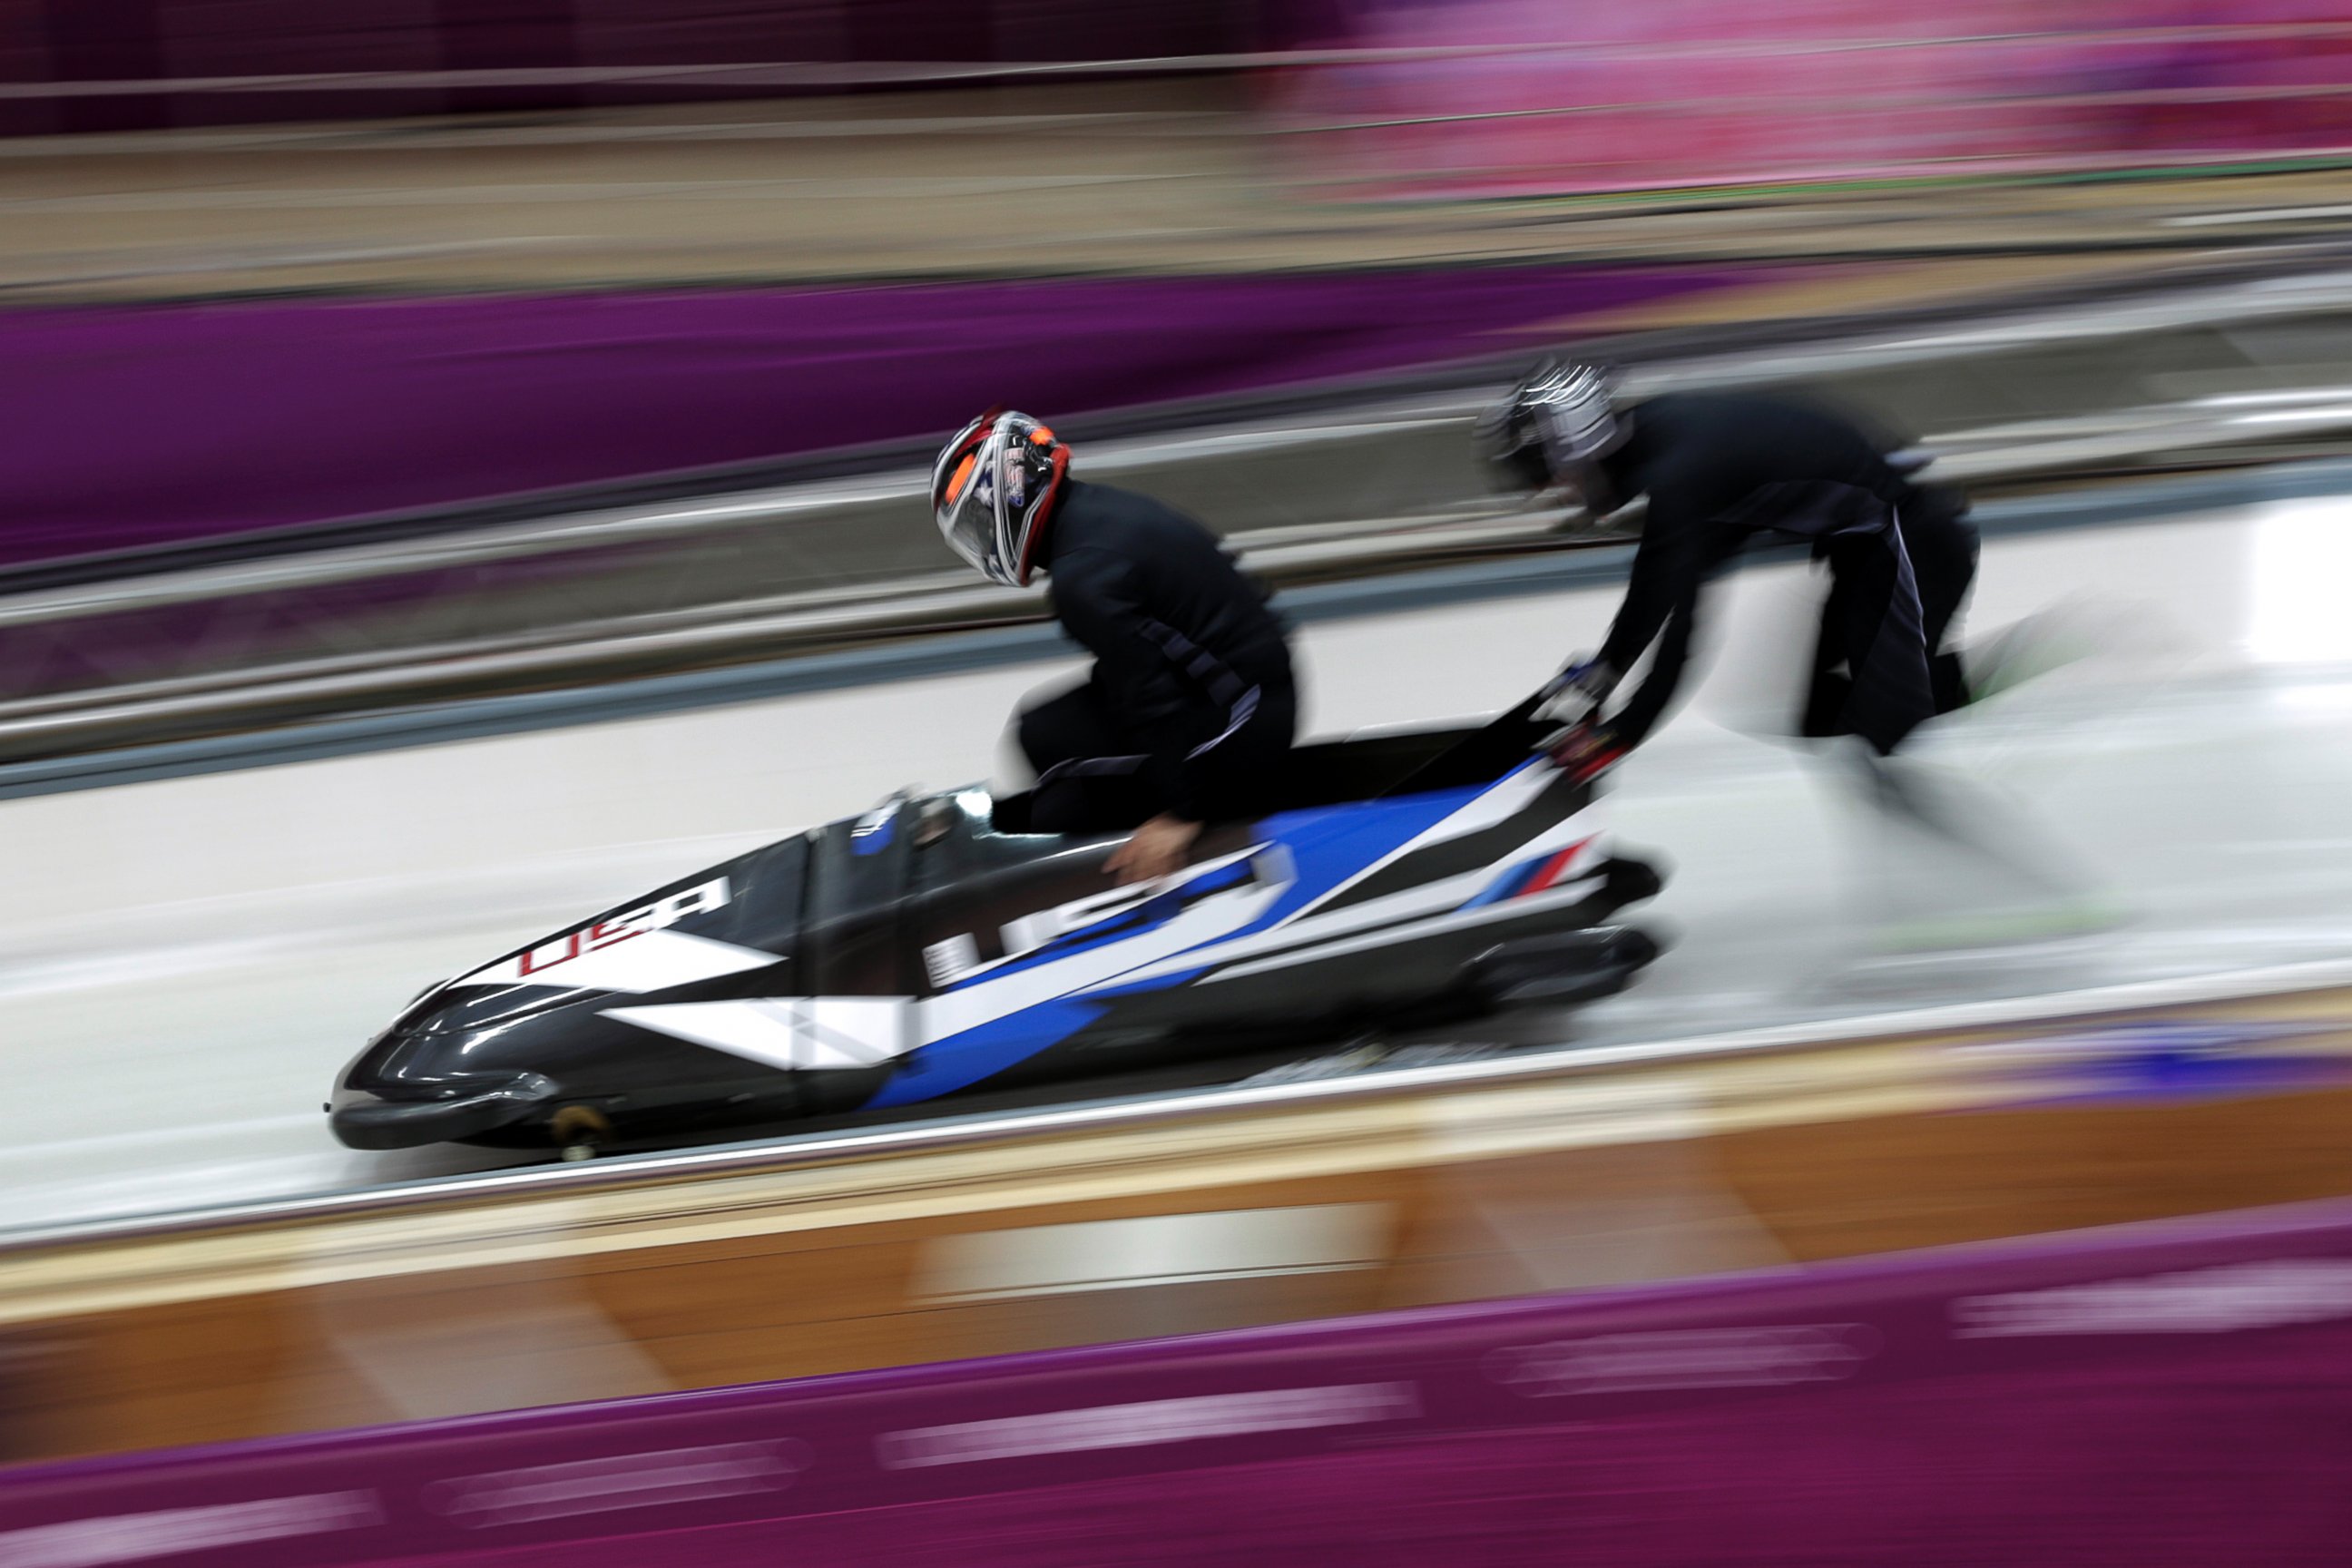 PHOTO: Members of the United States bobsleigh team practice ahead of the Sochi 2014 Winter Olympics at the Sanki Sliding Center, Feb. 6, 2014, in Sochi, Russia.  